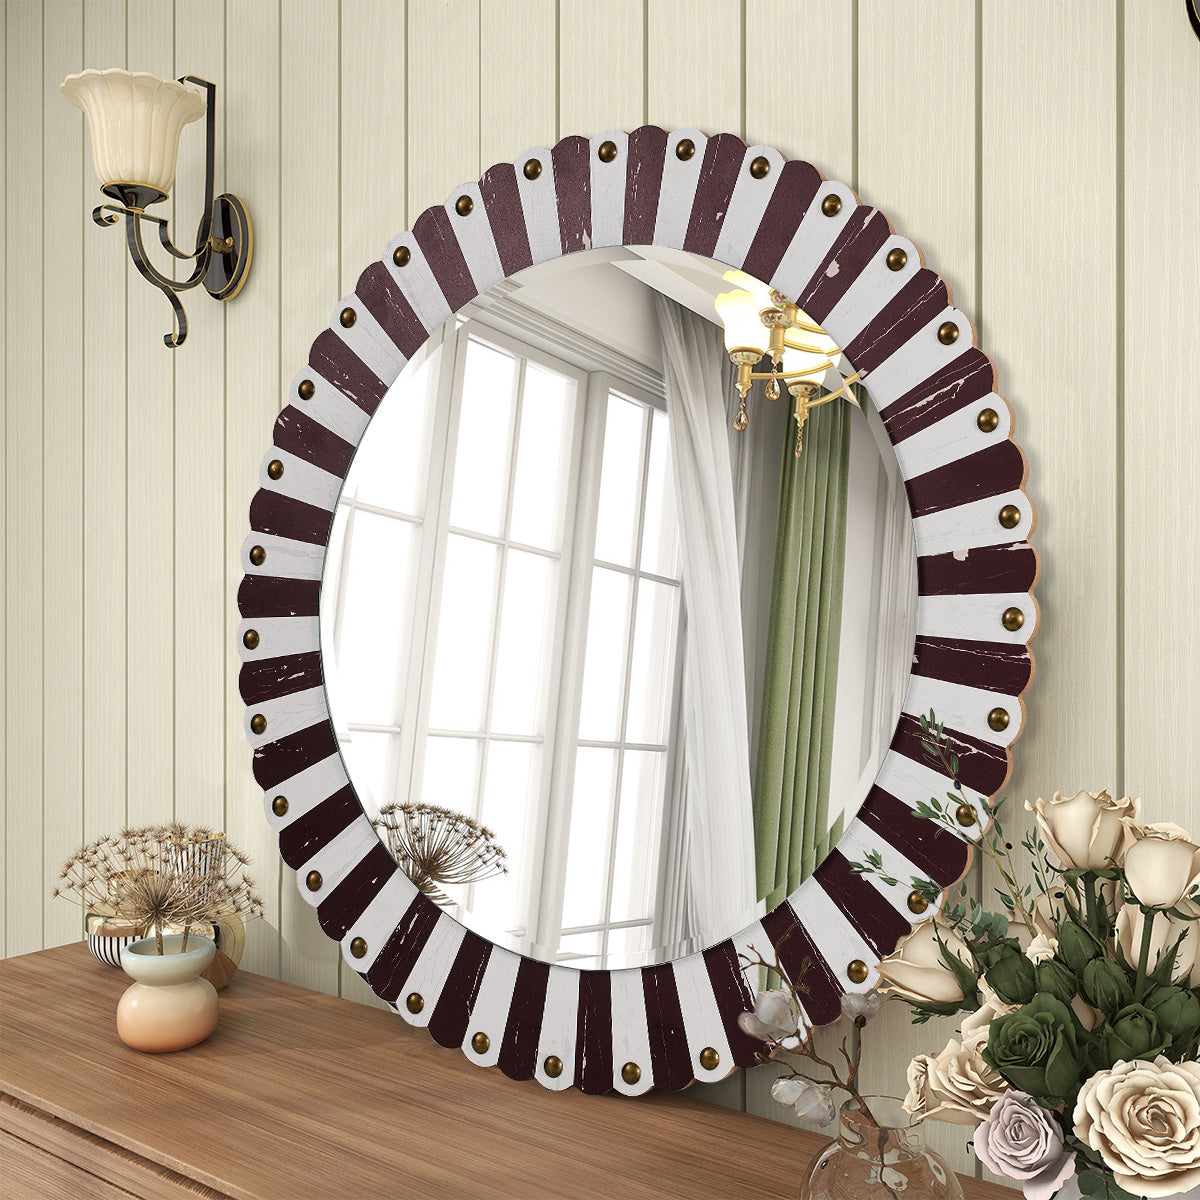 Rustic Wooden Round Wall Mirror Decor Accent Circle Mirror for Living Room, Bedroom, Entry